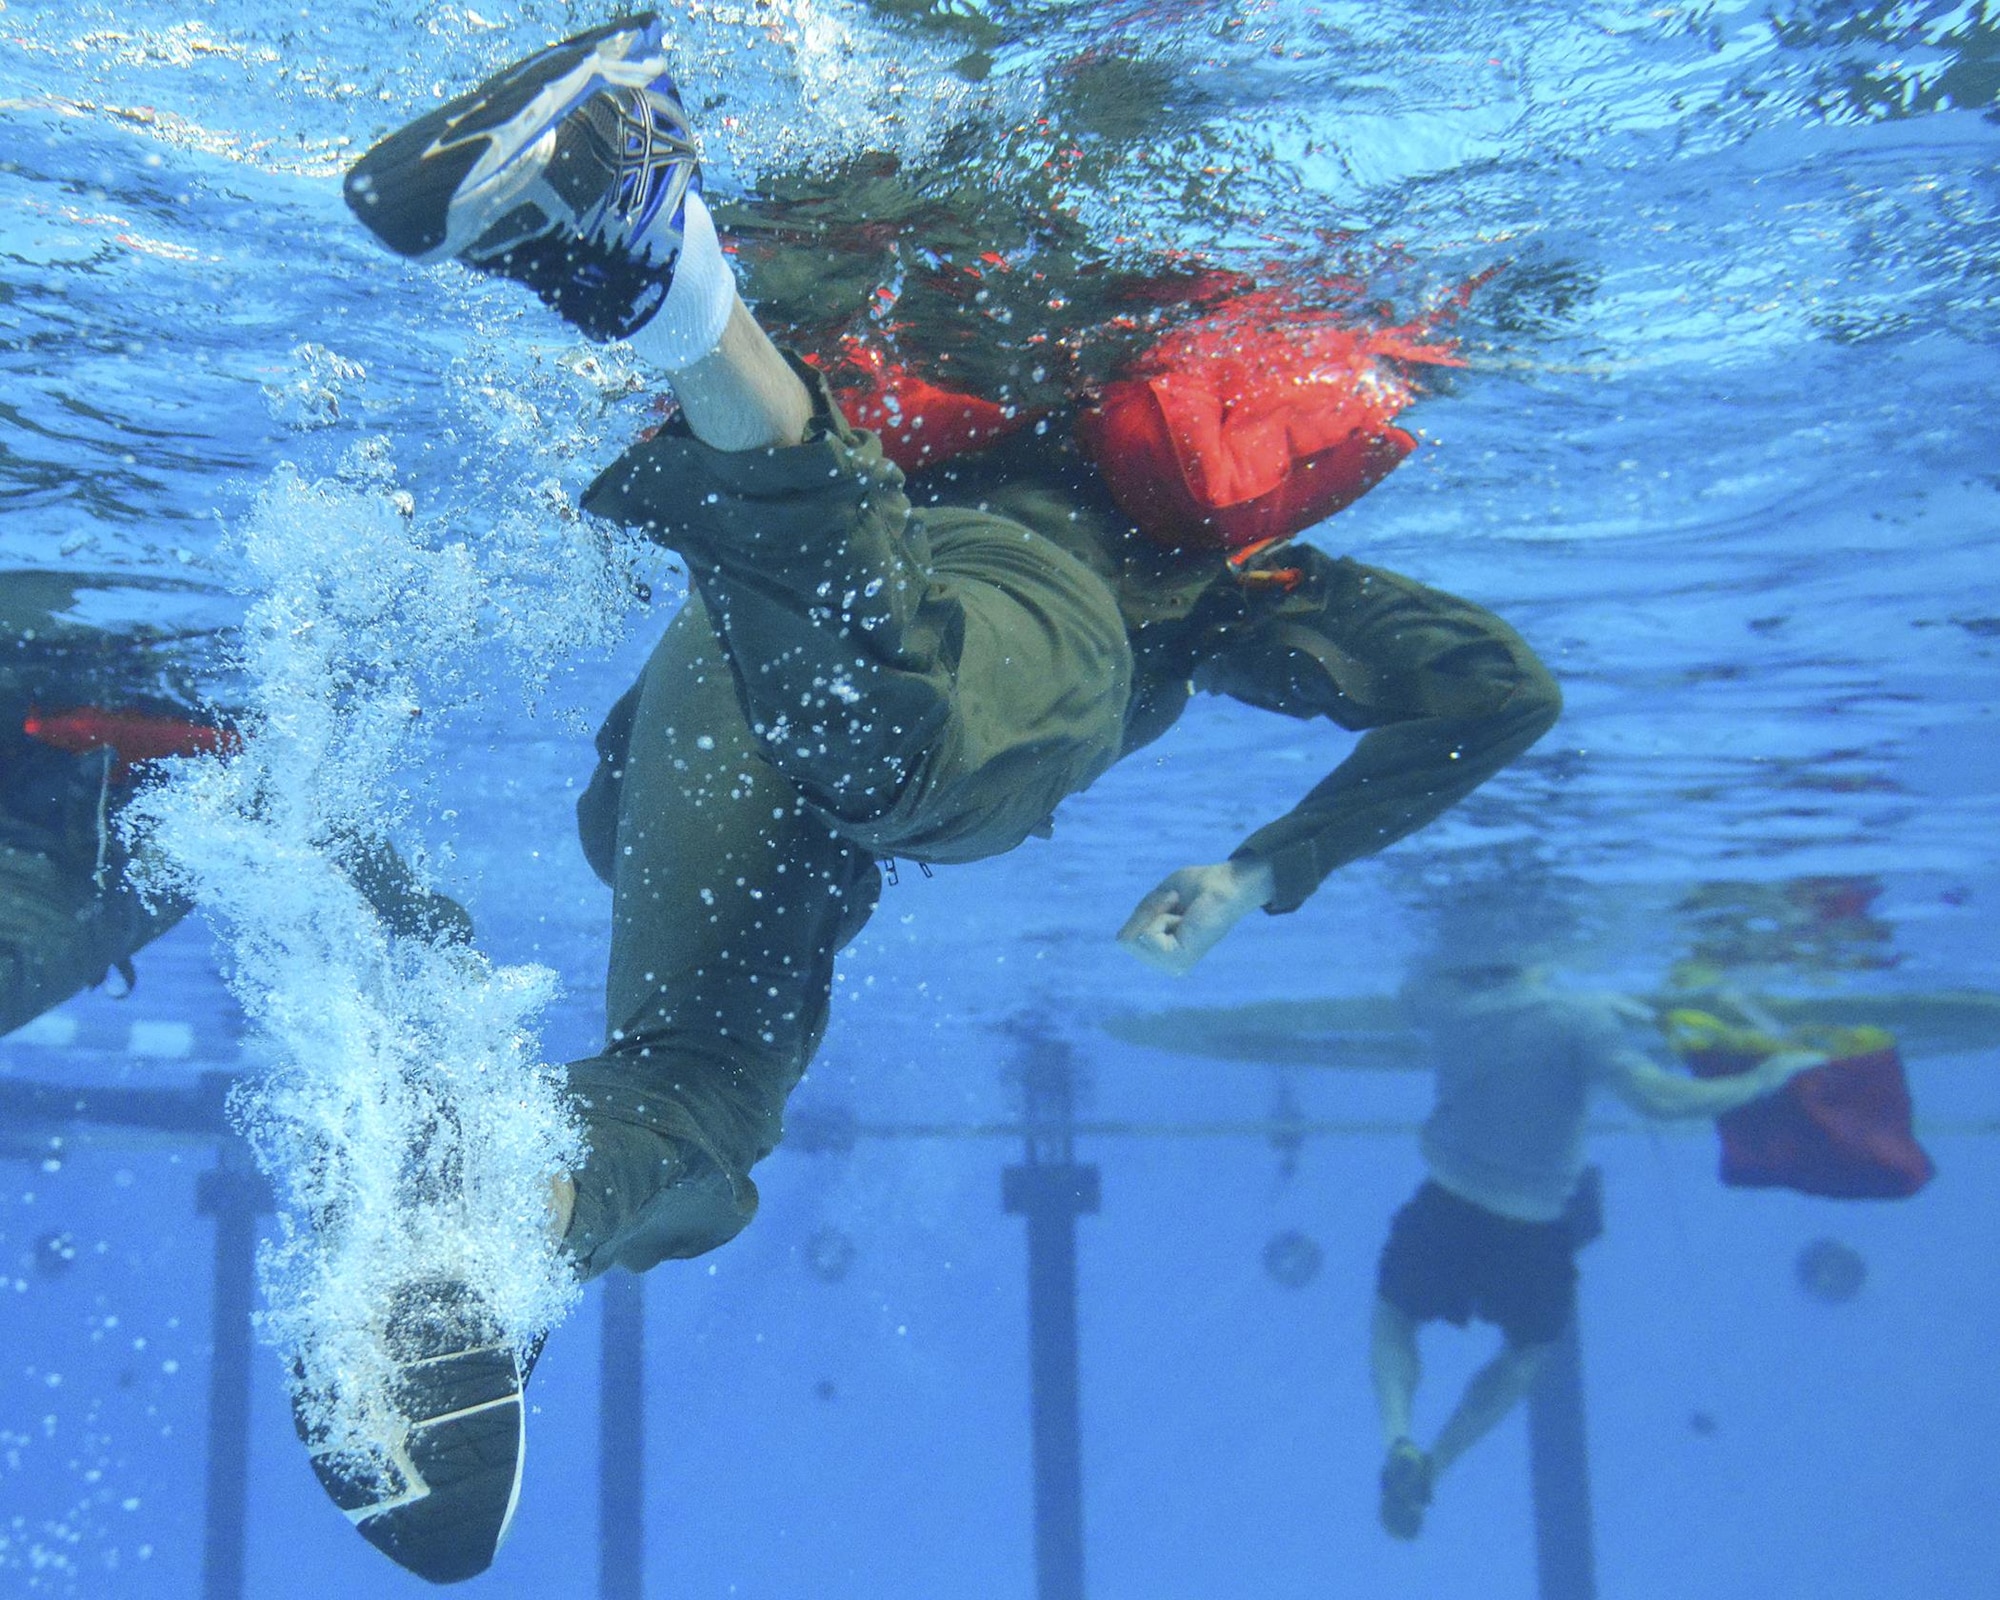 Participants in the survival, evasion, resistance and escape water survival course swim toward a life raft at Yokota Air Base, Japan, Sept. 22, 2015. The water survival course familiarizes students with the equipment and procedures used in the event of an aircraft emergency. (U.S. Air Force photo/Airman 1st Class Elizabeth Baker) 